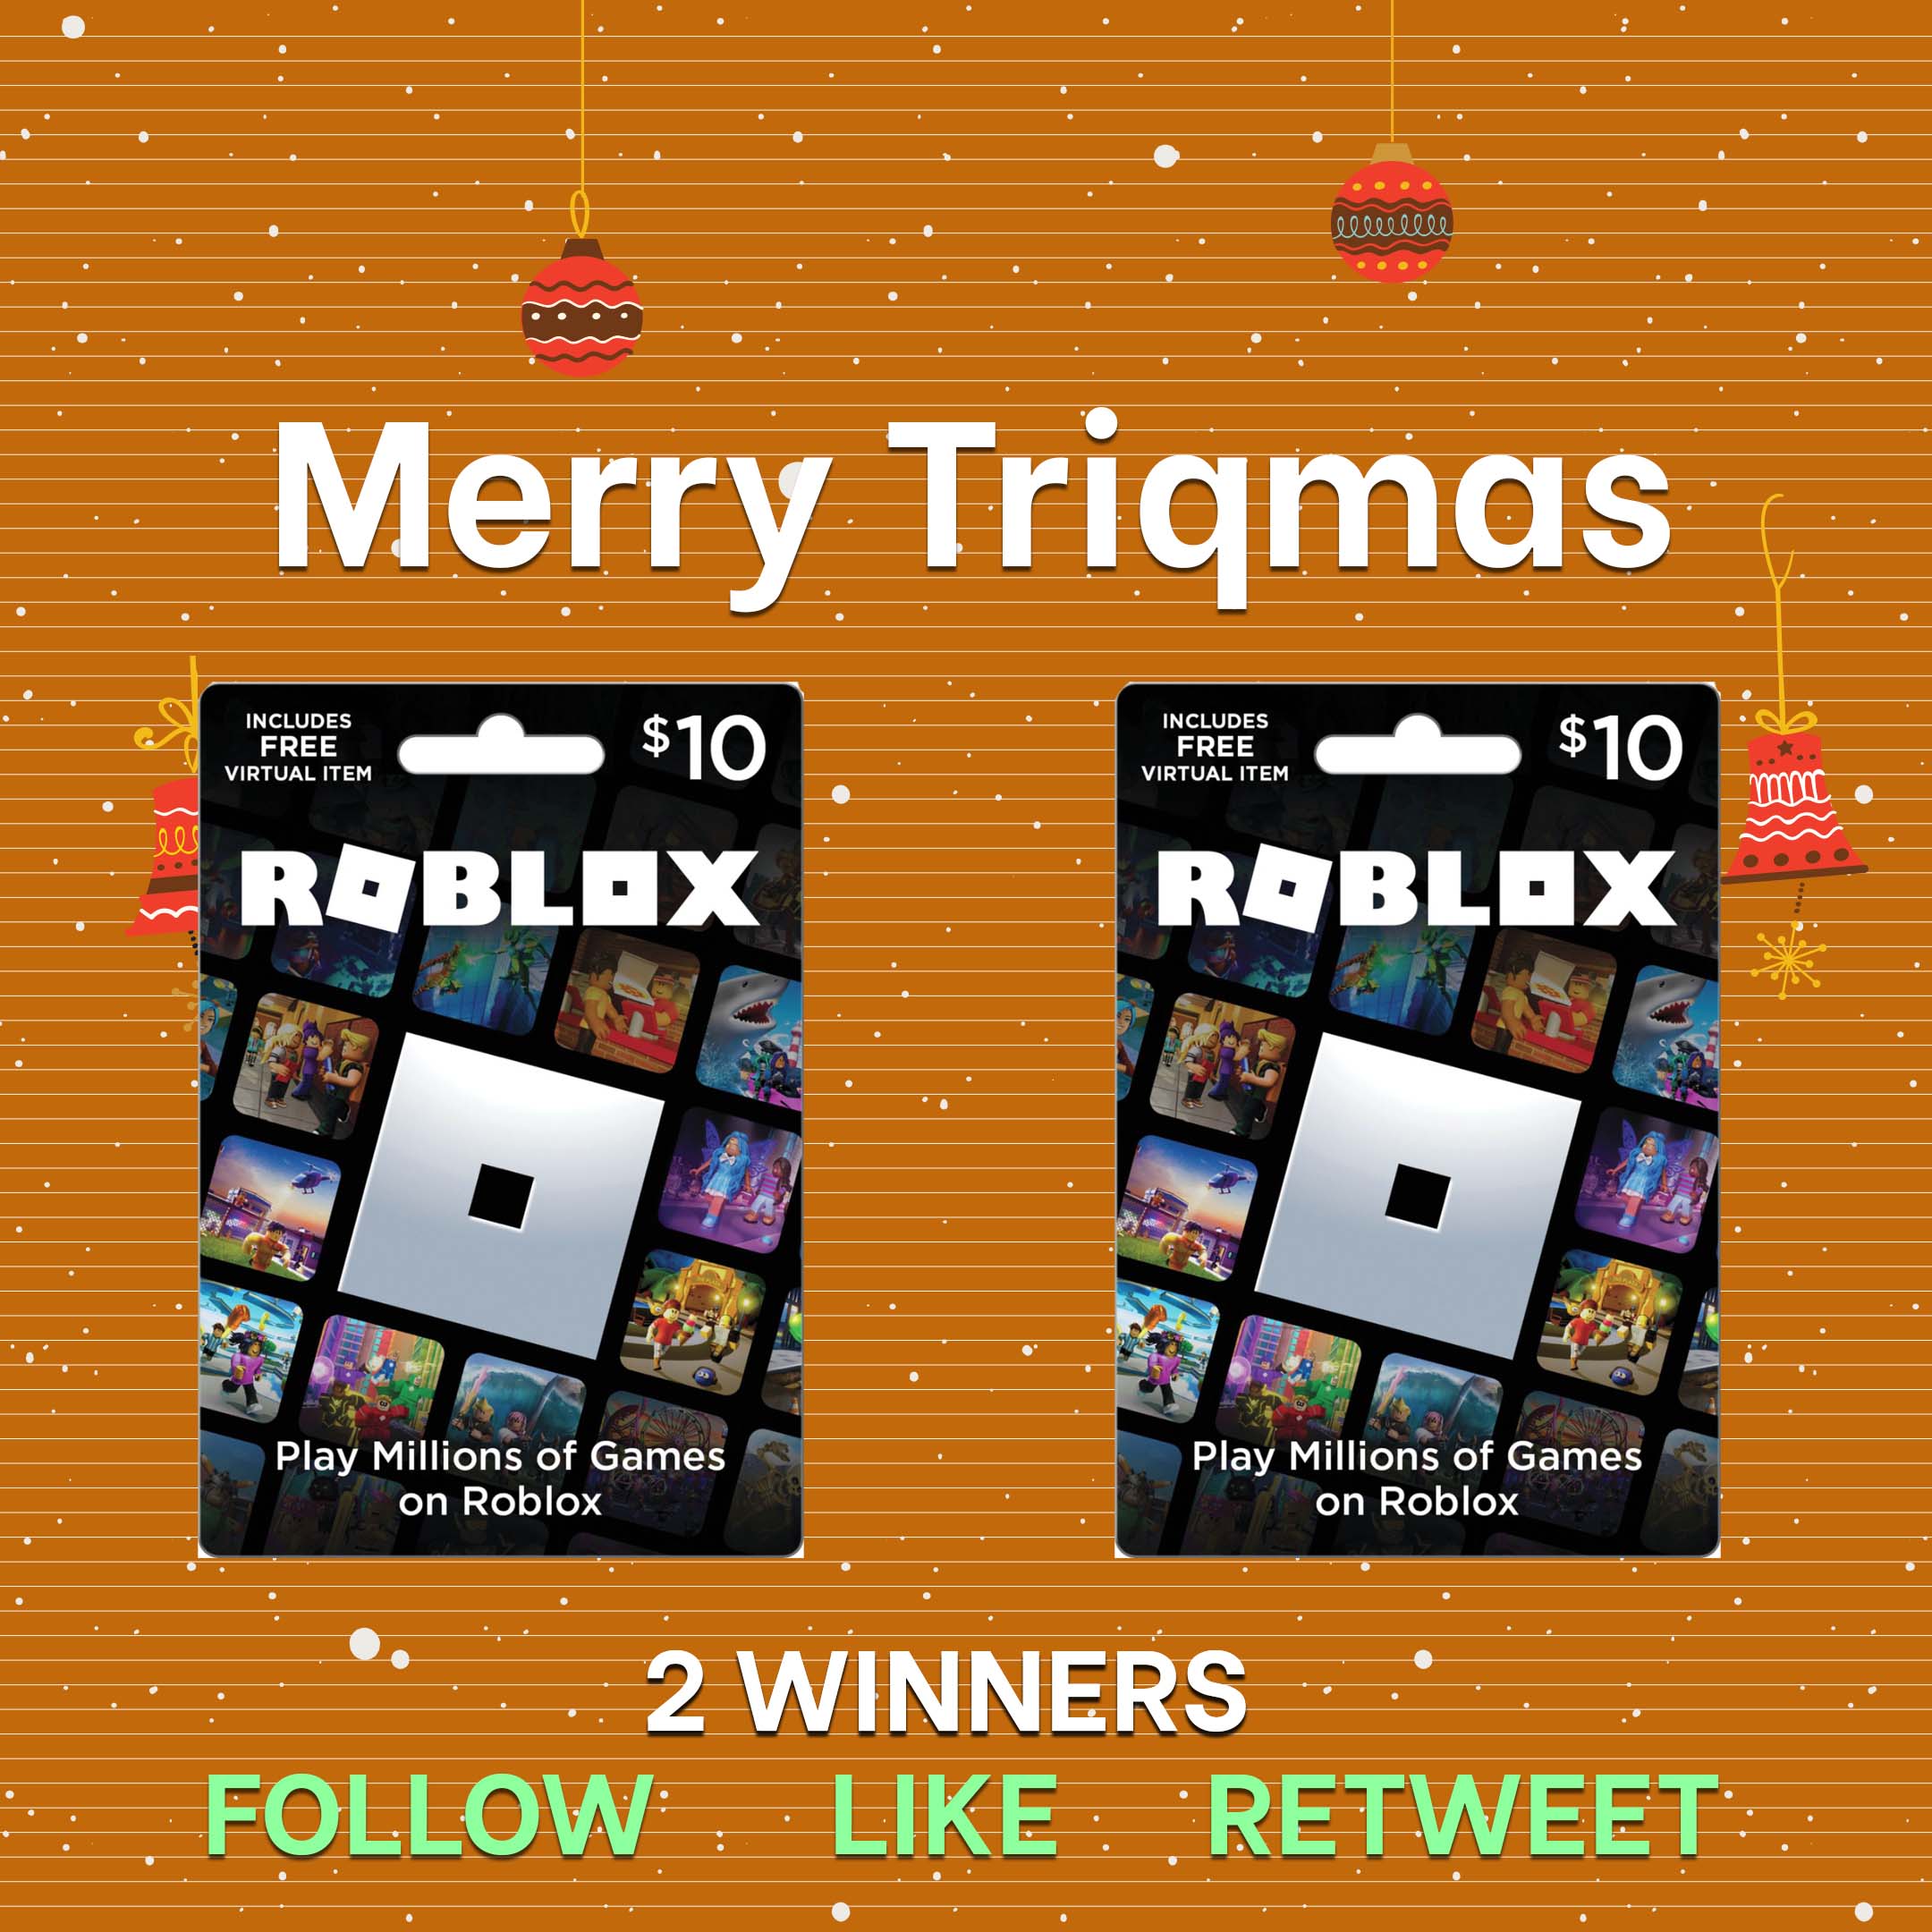 Plebcy on X: 1,000 Robux Roblox Card, Like this Tweet to win